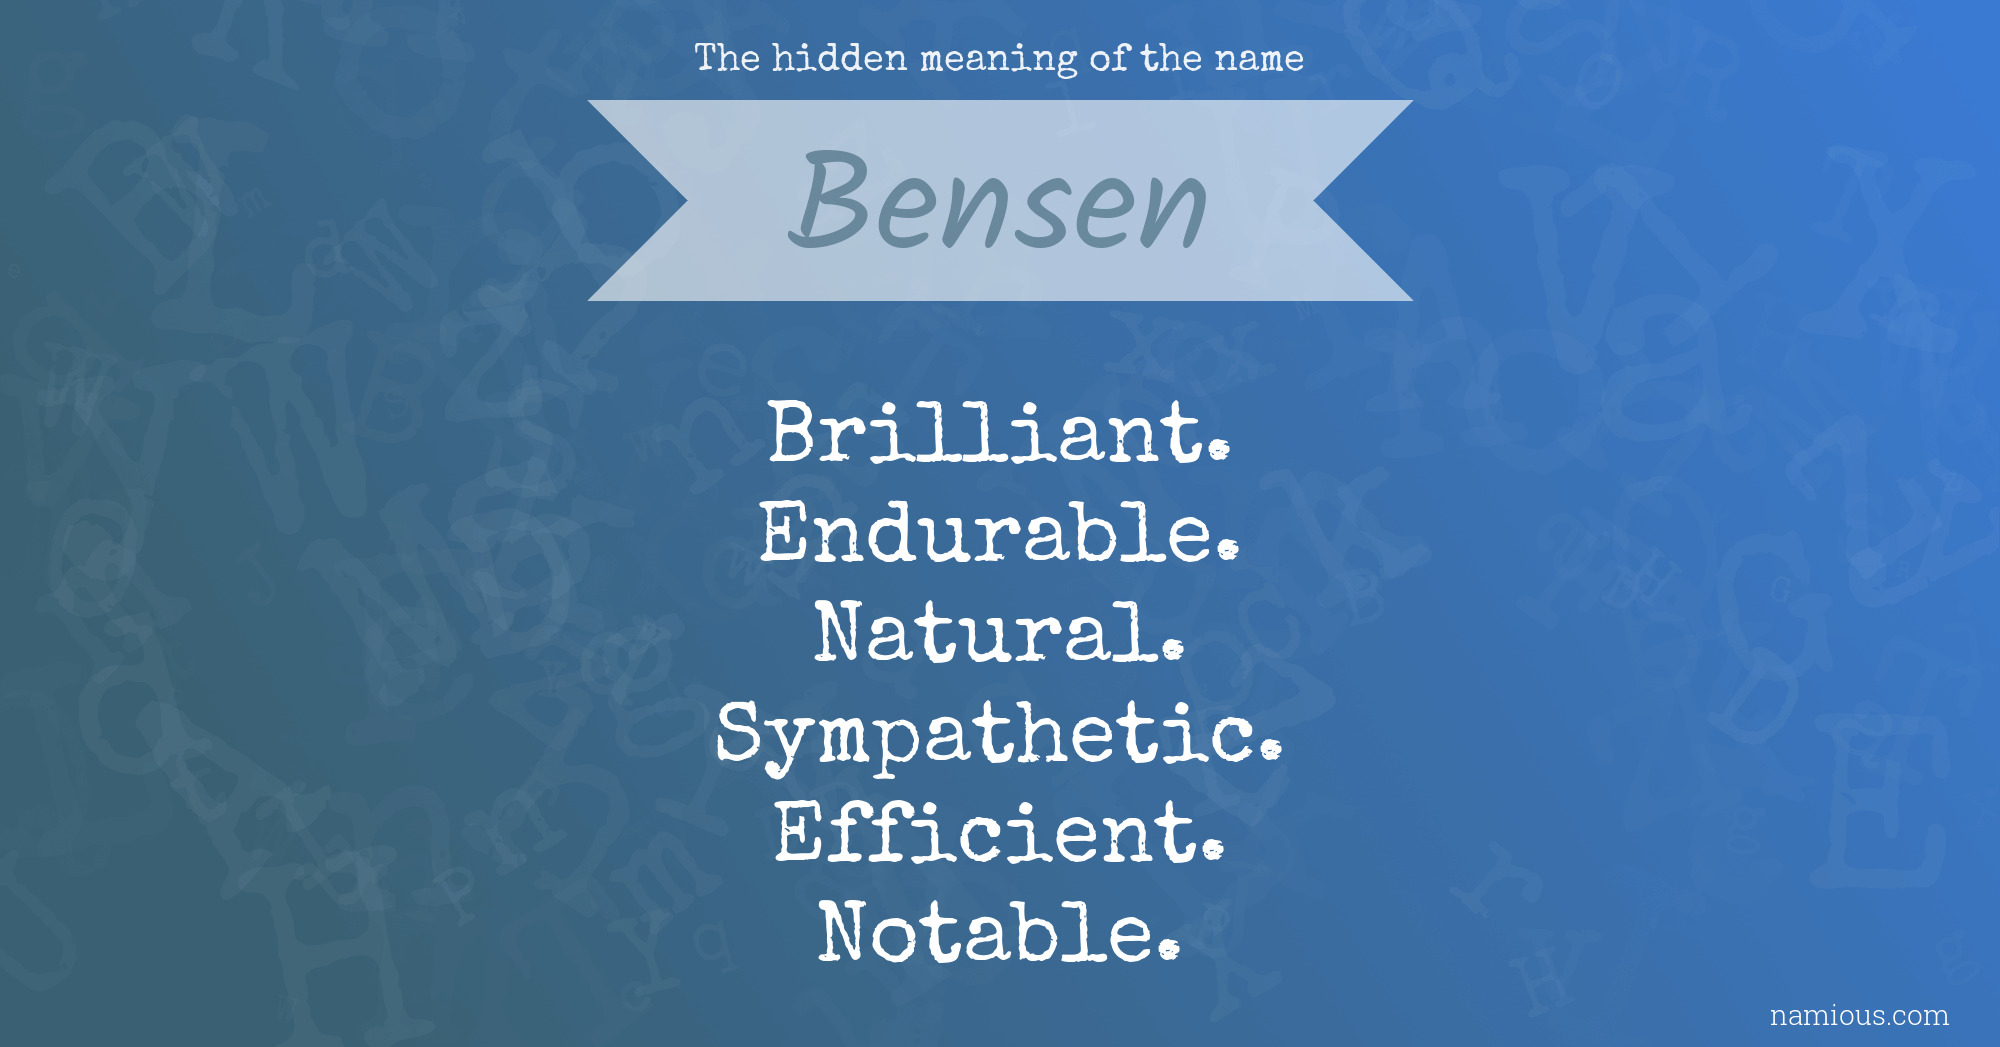 The hidden meaning of the name Bensen